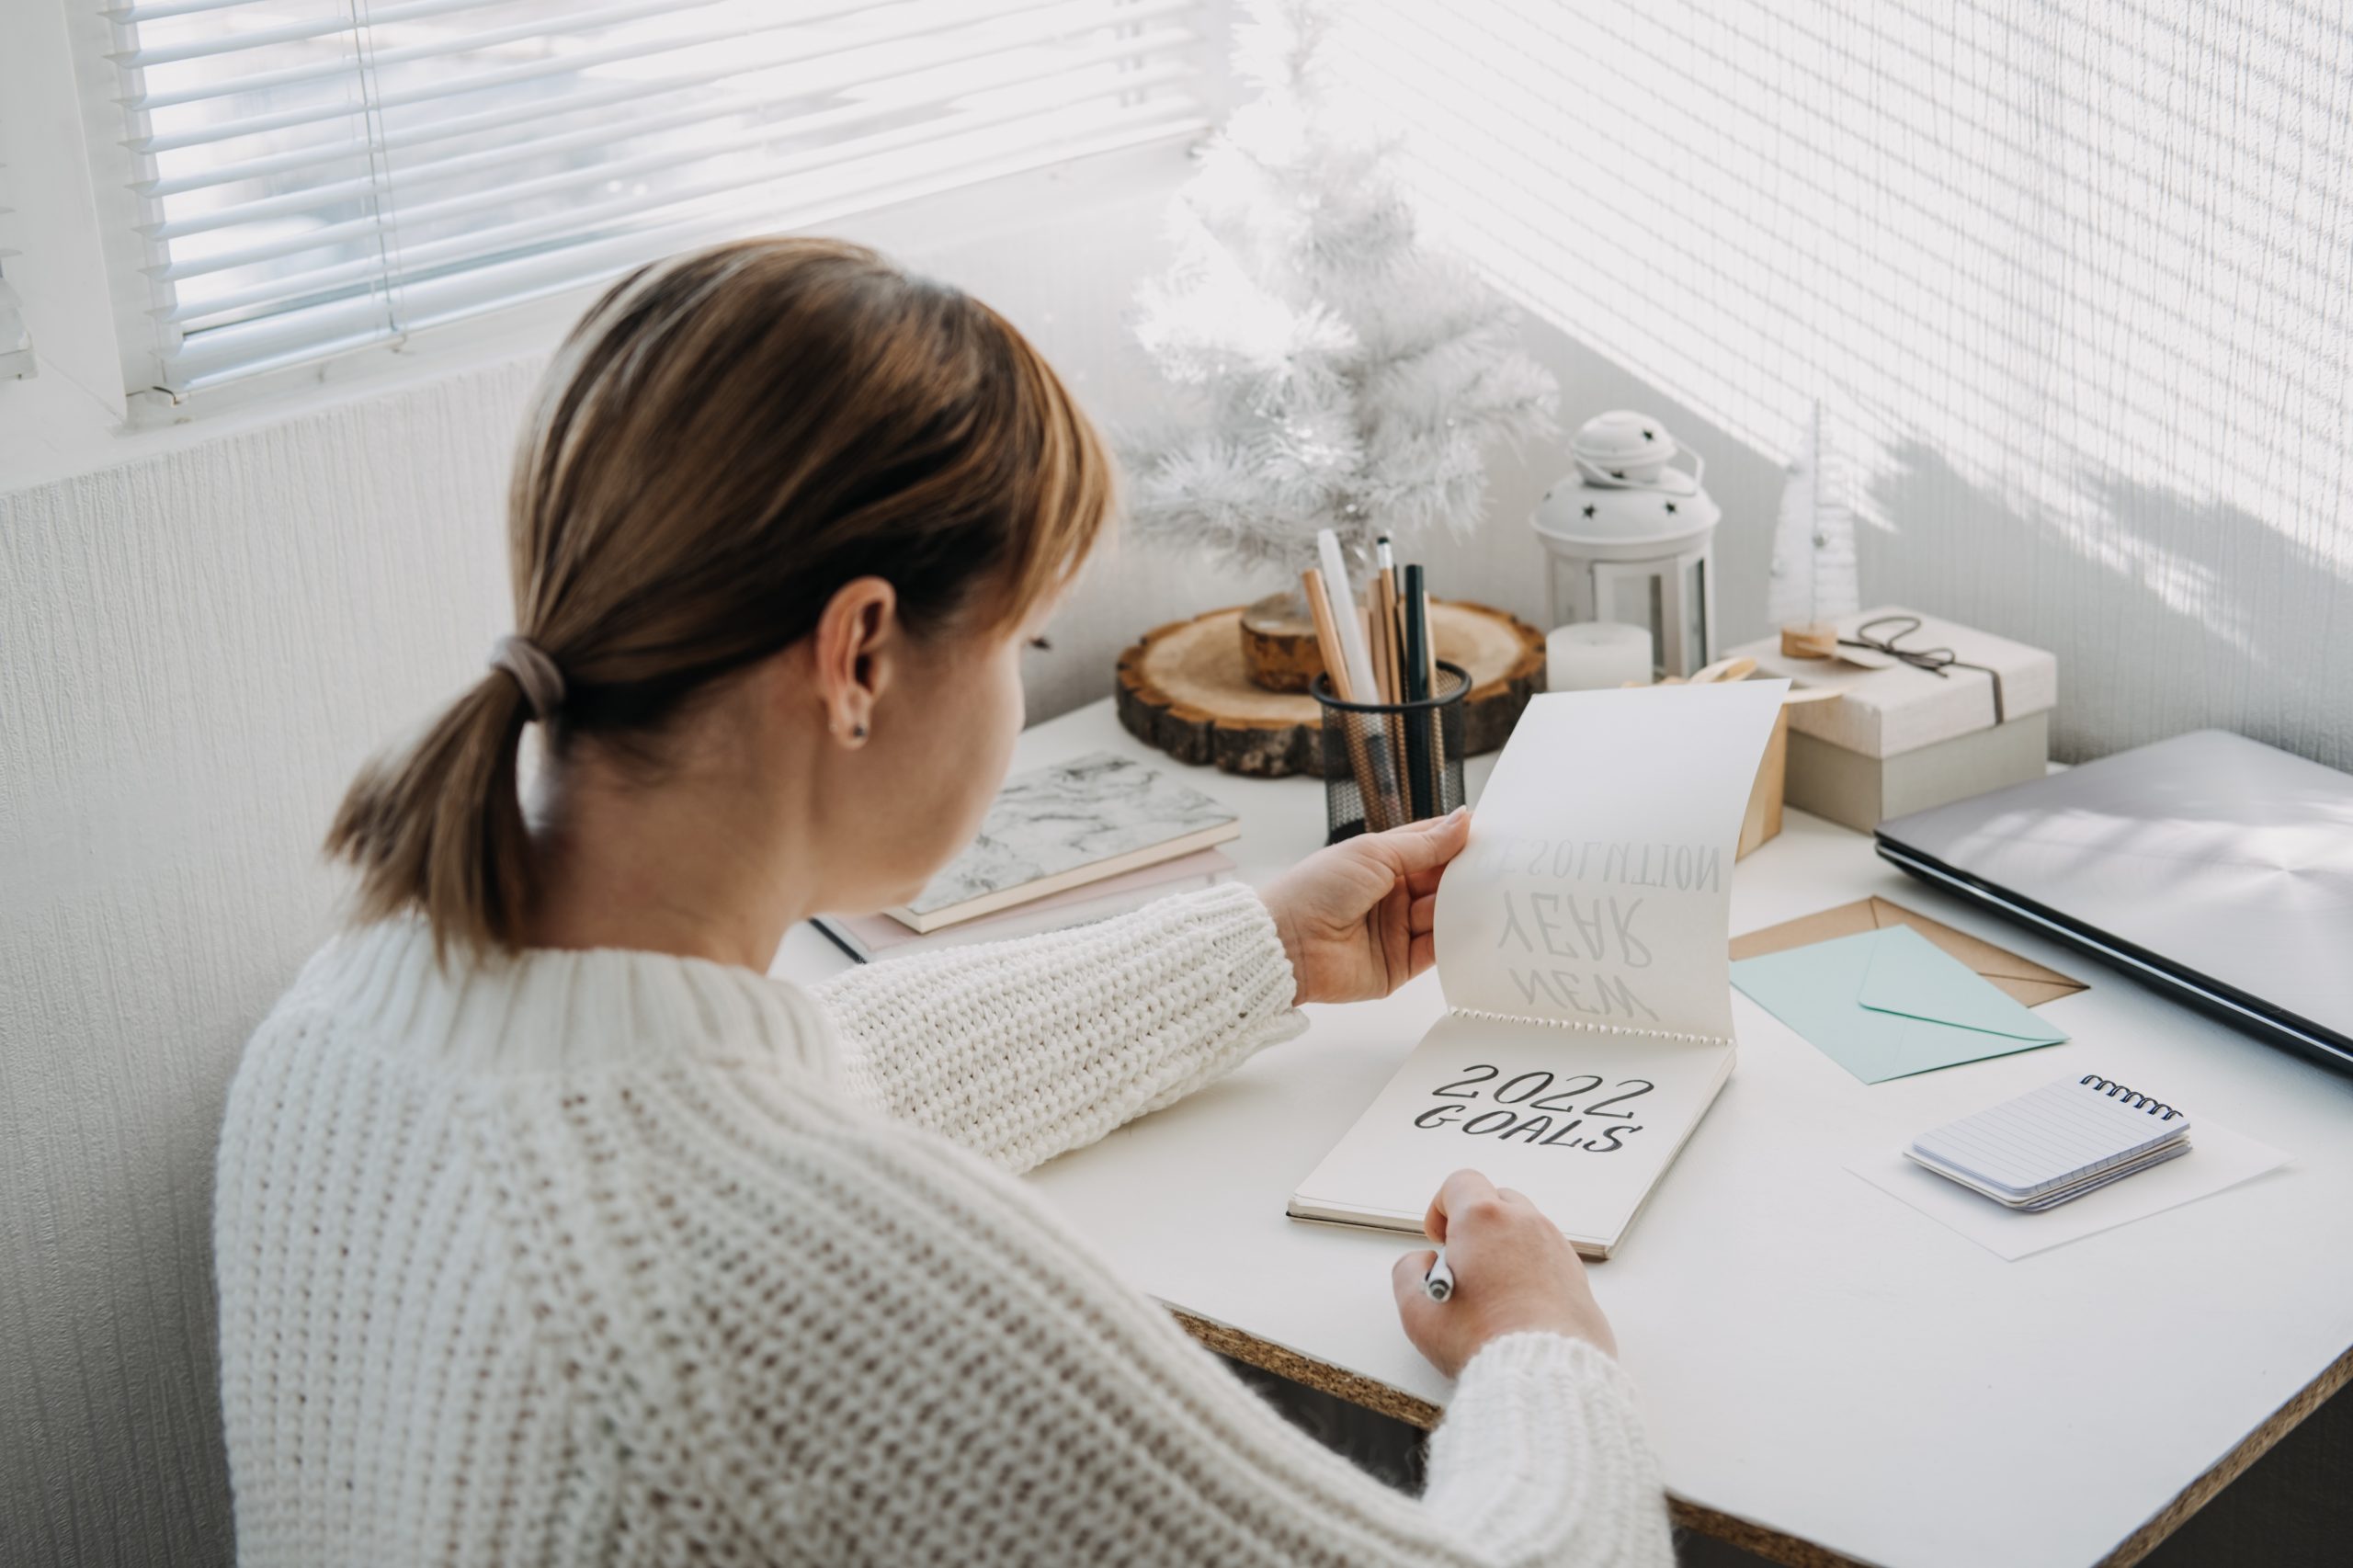 2022 goals, New year resolution. Woman in white sweater writing Text 2022 goals in open notepad on the table. Start new year, planning and setting goals for the next year.